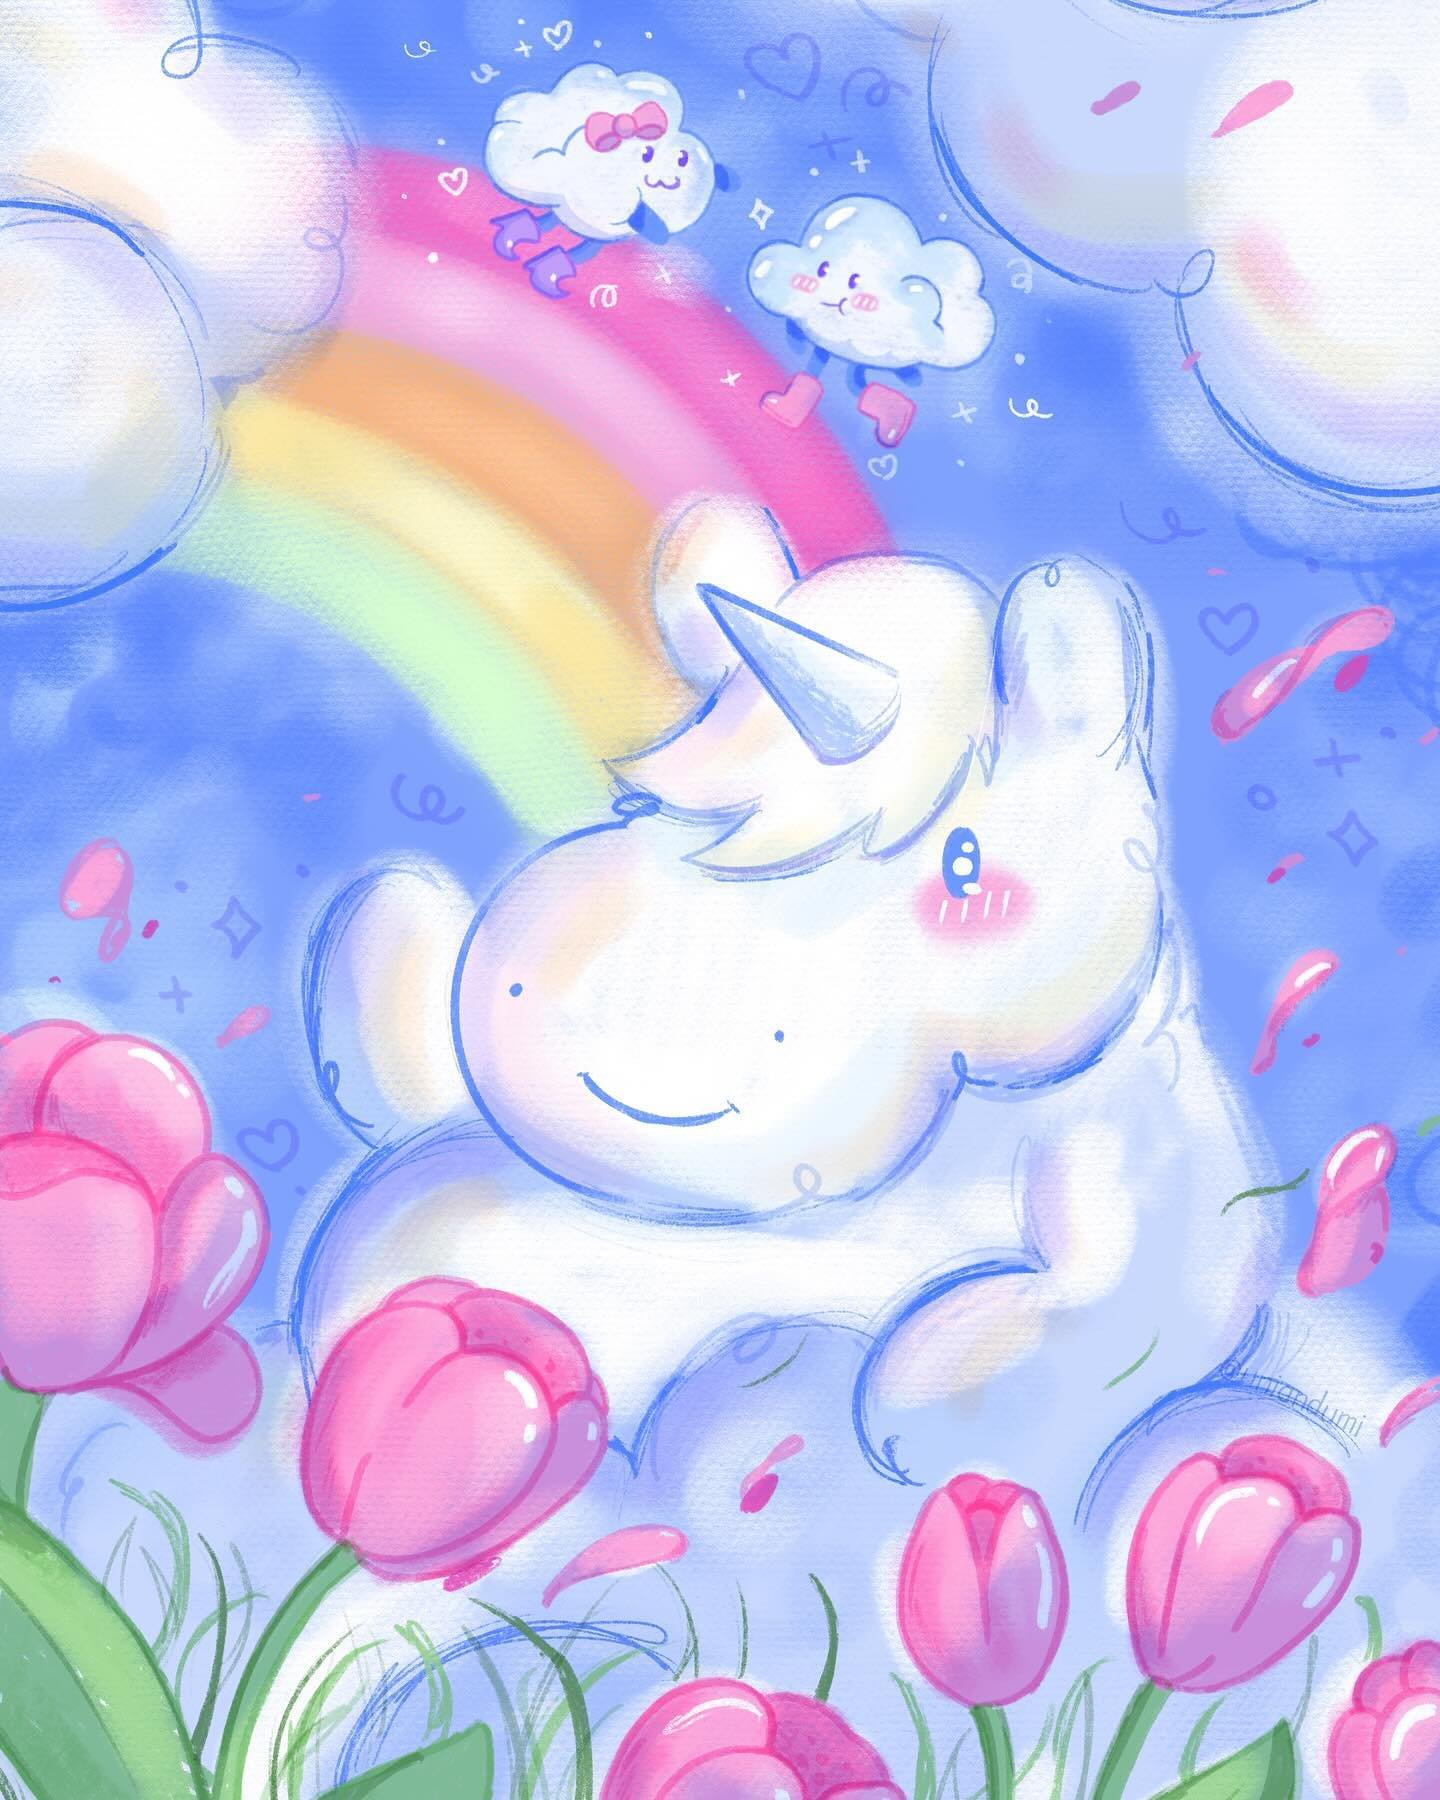 Uni as a cloud 🦄☁️💖💙 this illustration was so comforting to draw! I included Cloudy and Rane in the sky as well! I&rsquo;m looking forward to all this warm weather! 
.
.
.
🏷️
#clouds #natureillustration #illustration #cuteillustration #kawaiiillu